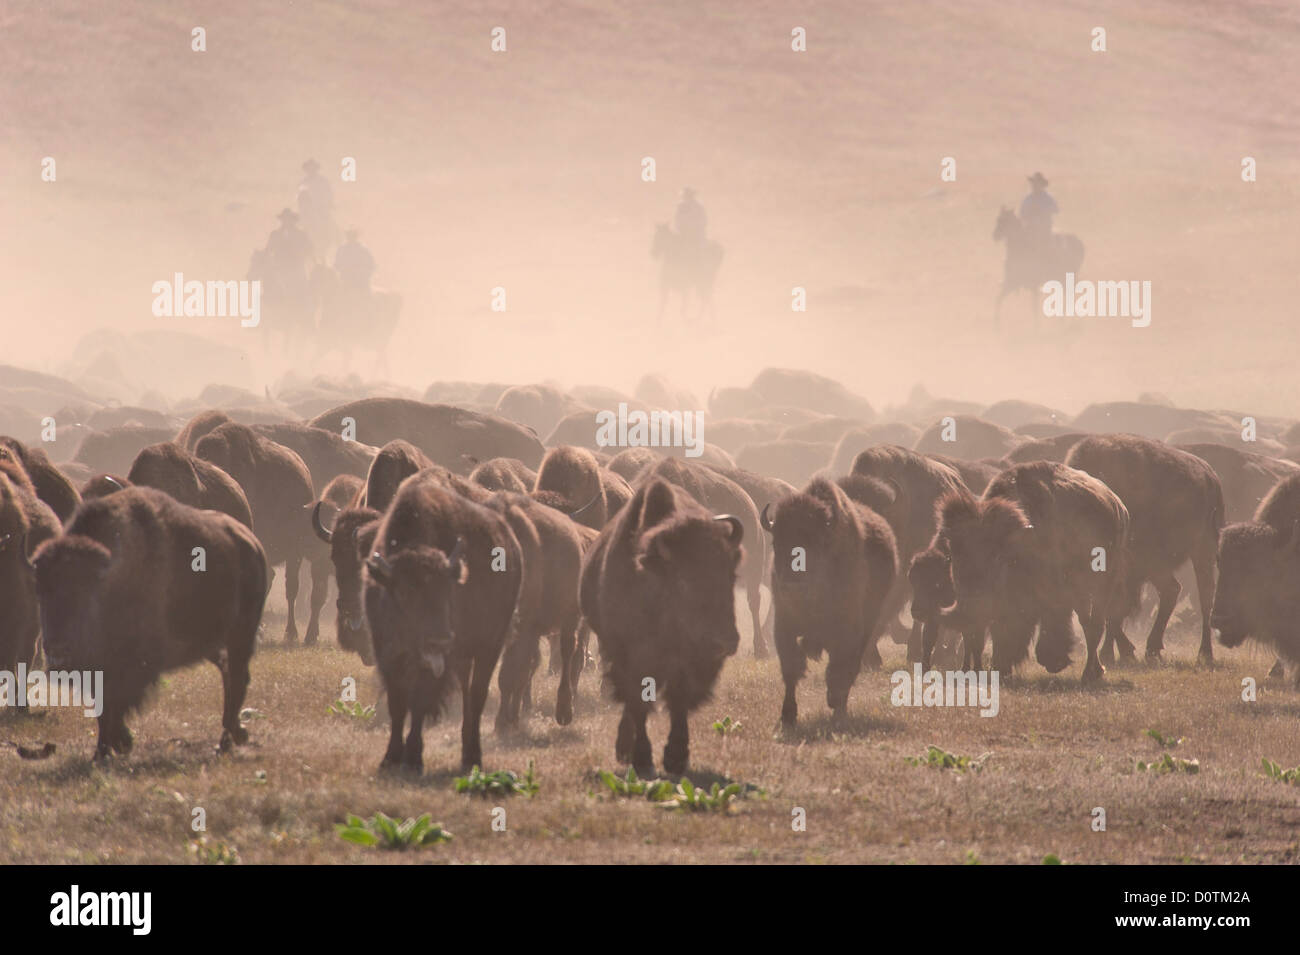 Bison, bos bison, buffalo, herd, foliage, autumn, fall, stampede, dust, prairie, grassland, Great Plains, Custer, State Park, he Stock Photo